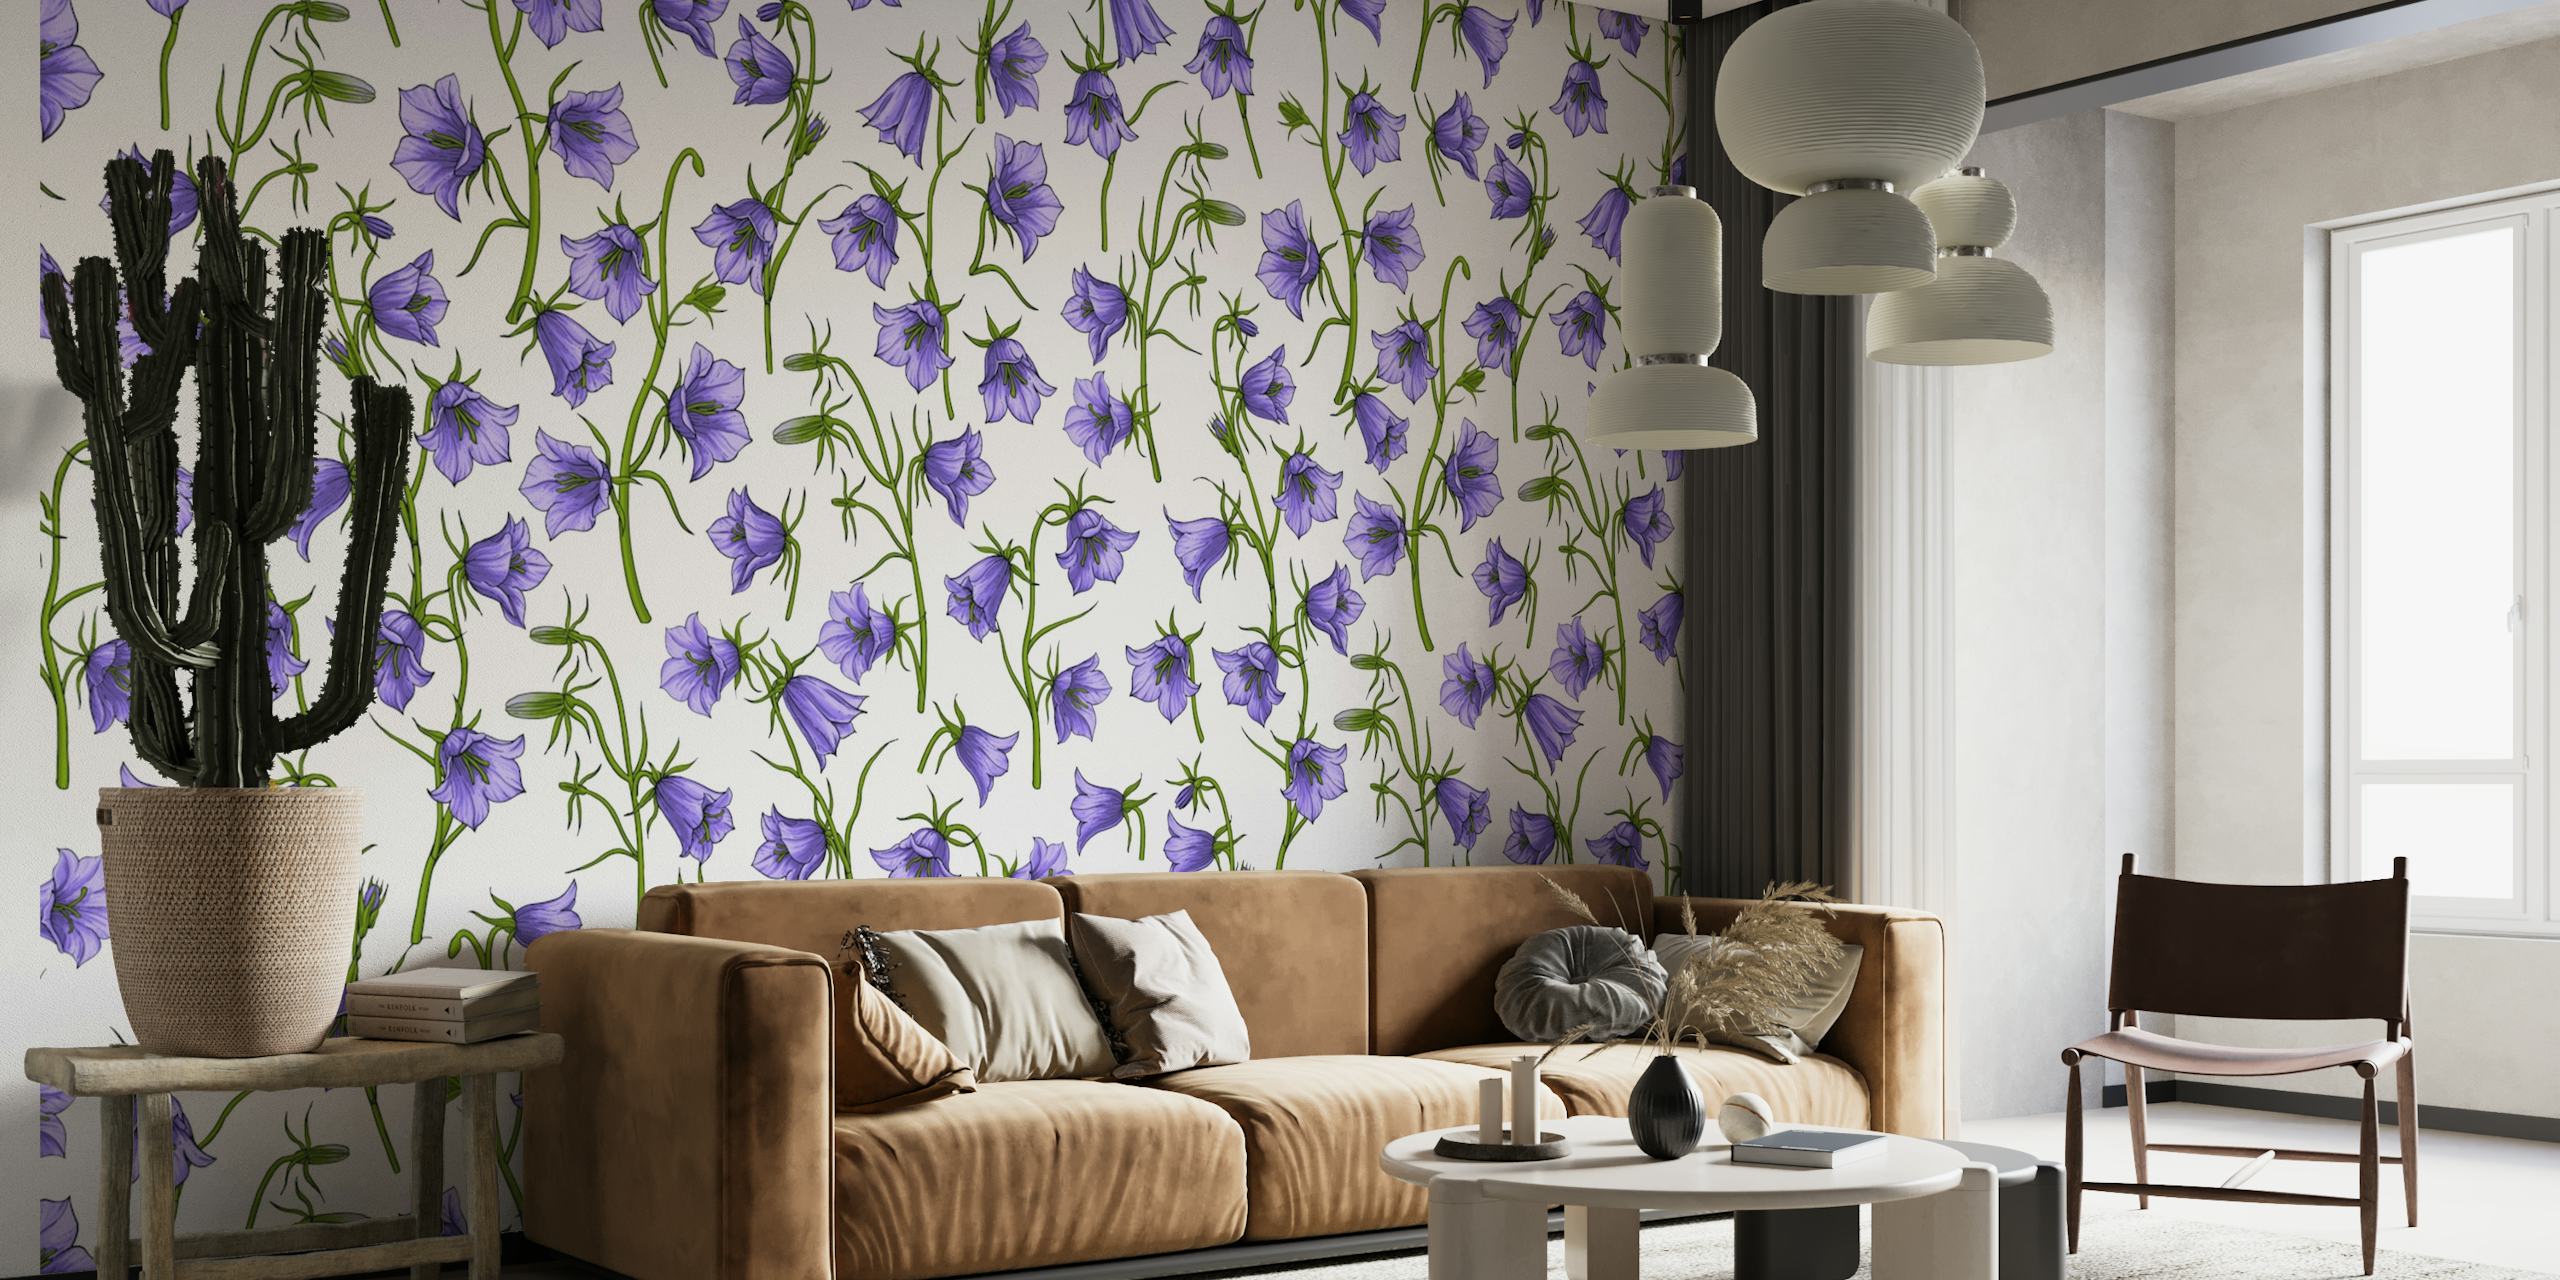 Bellflowers in Violet wall mural with a repeating pattern of violet bell-shaped flowers on a white background